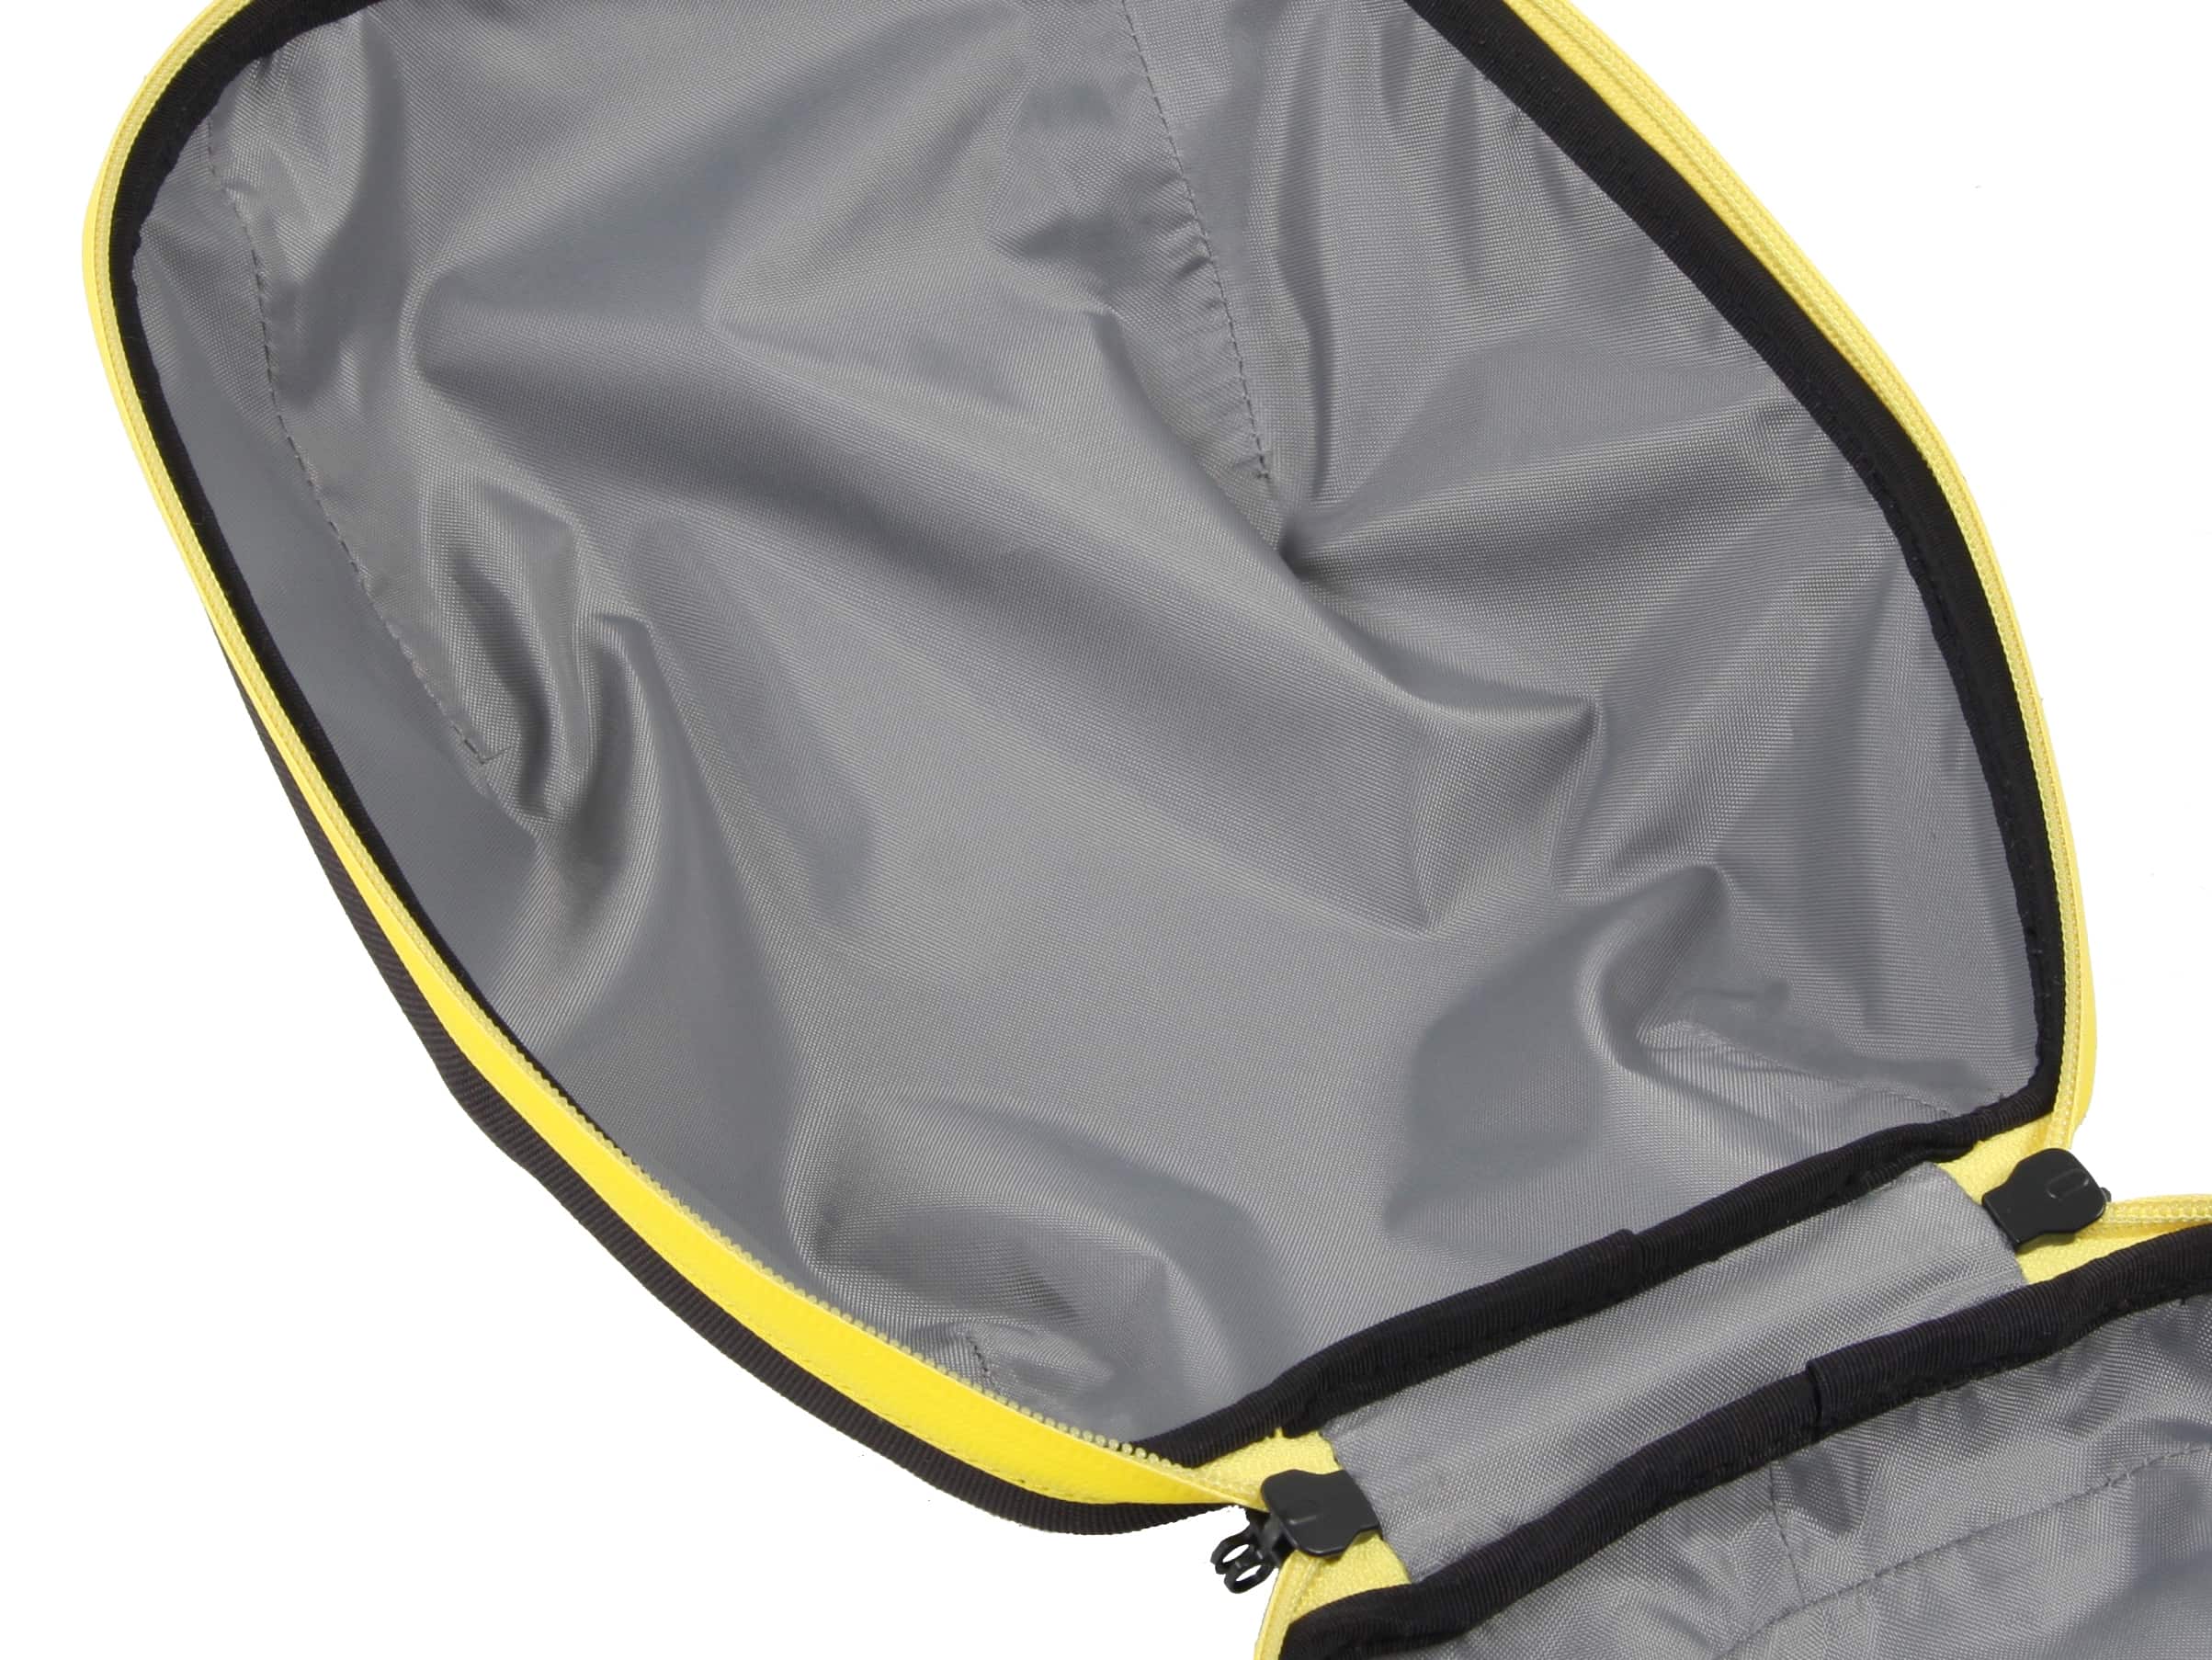 Tankbag Royster Daypack 5 ltr. black with yellow zipper